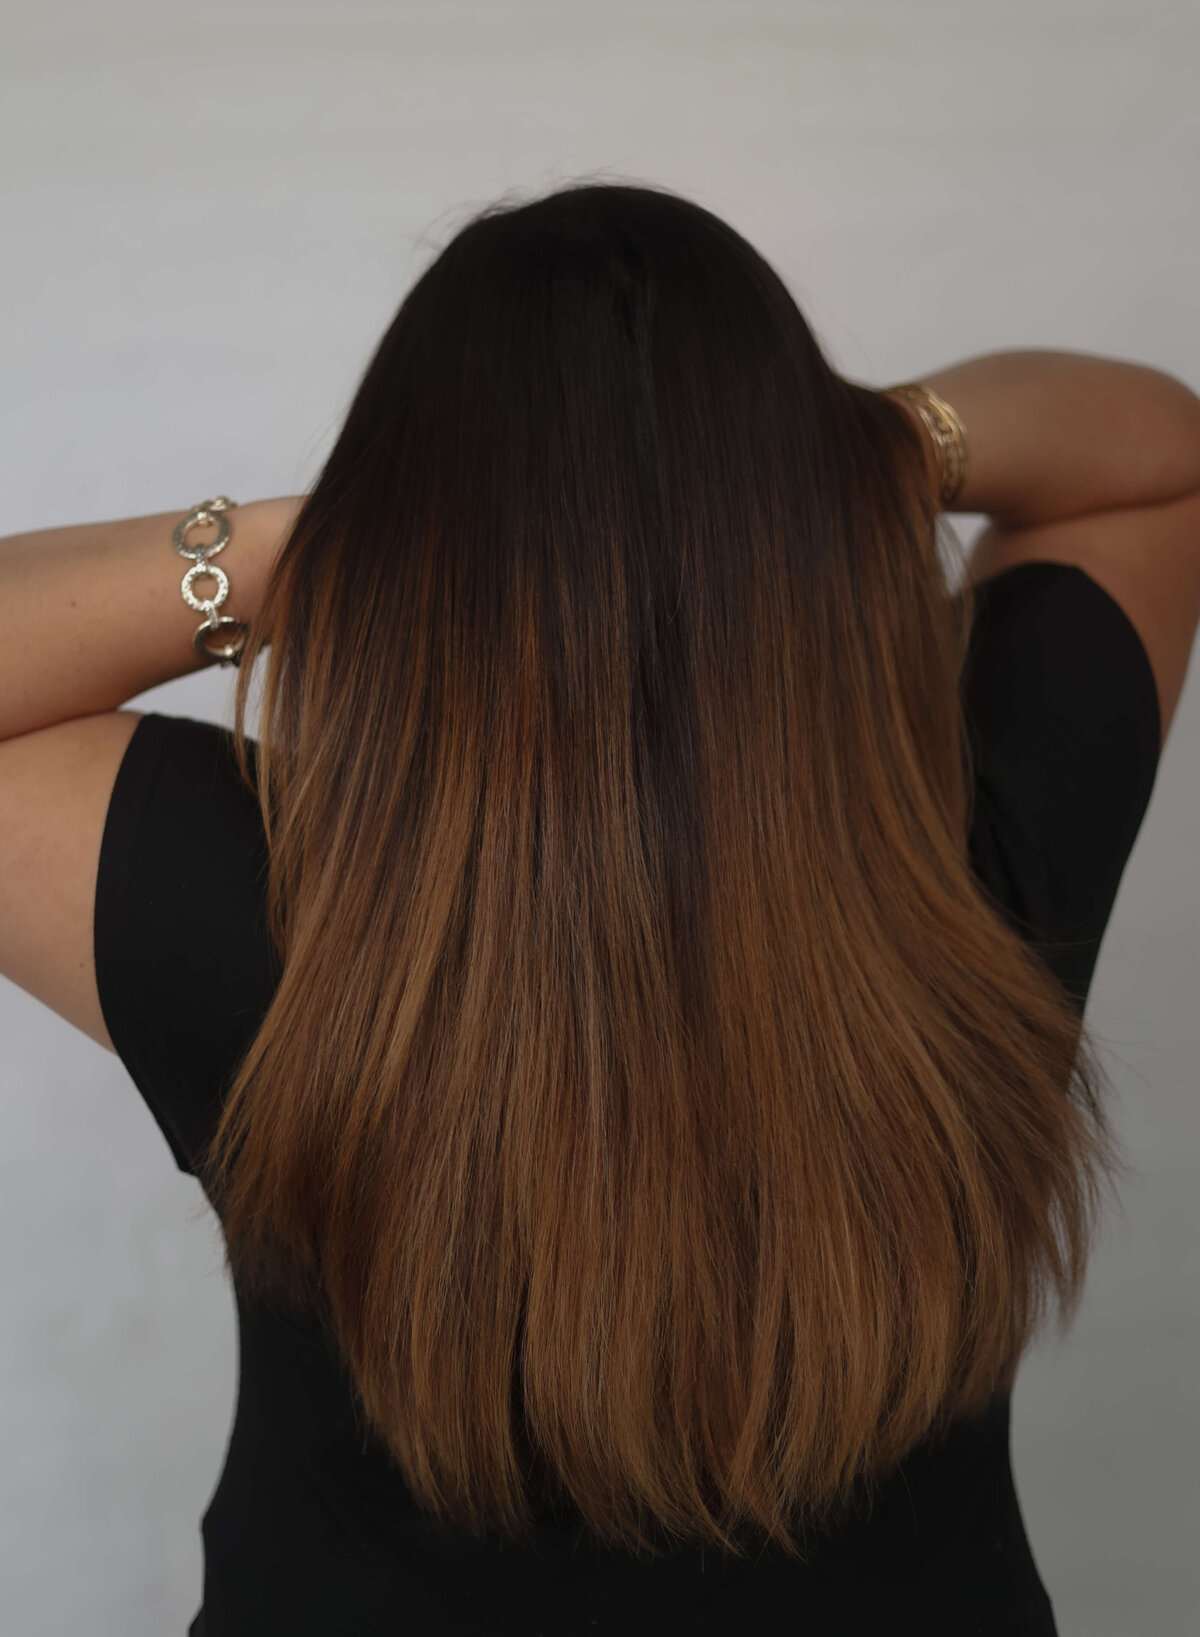 brunette women with new haircut showing back of her hair